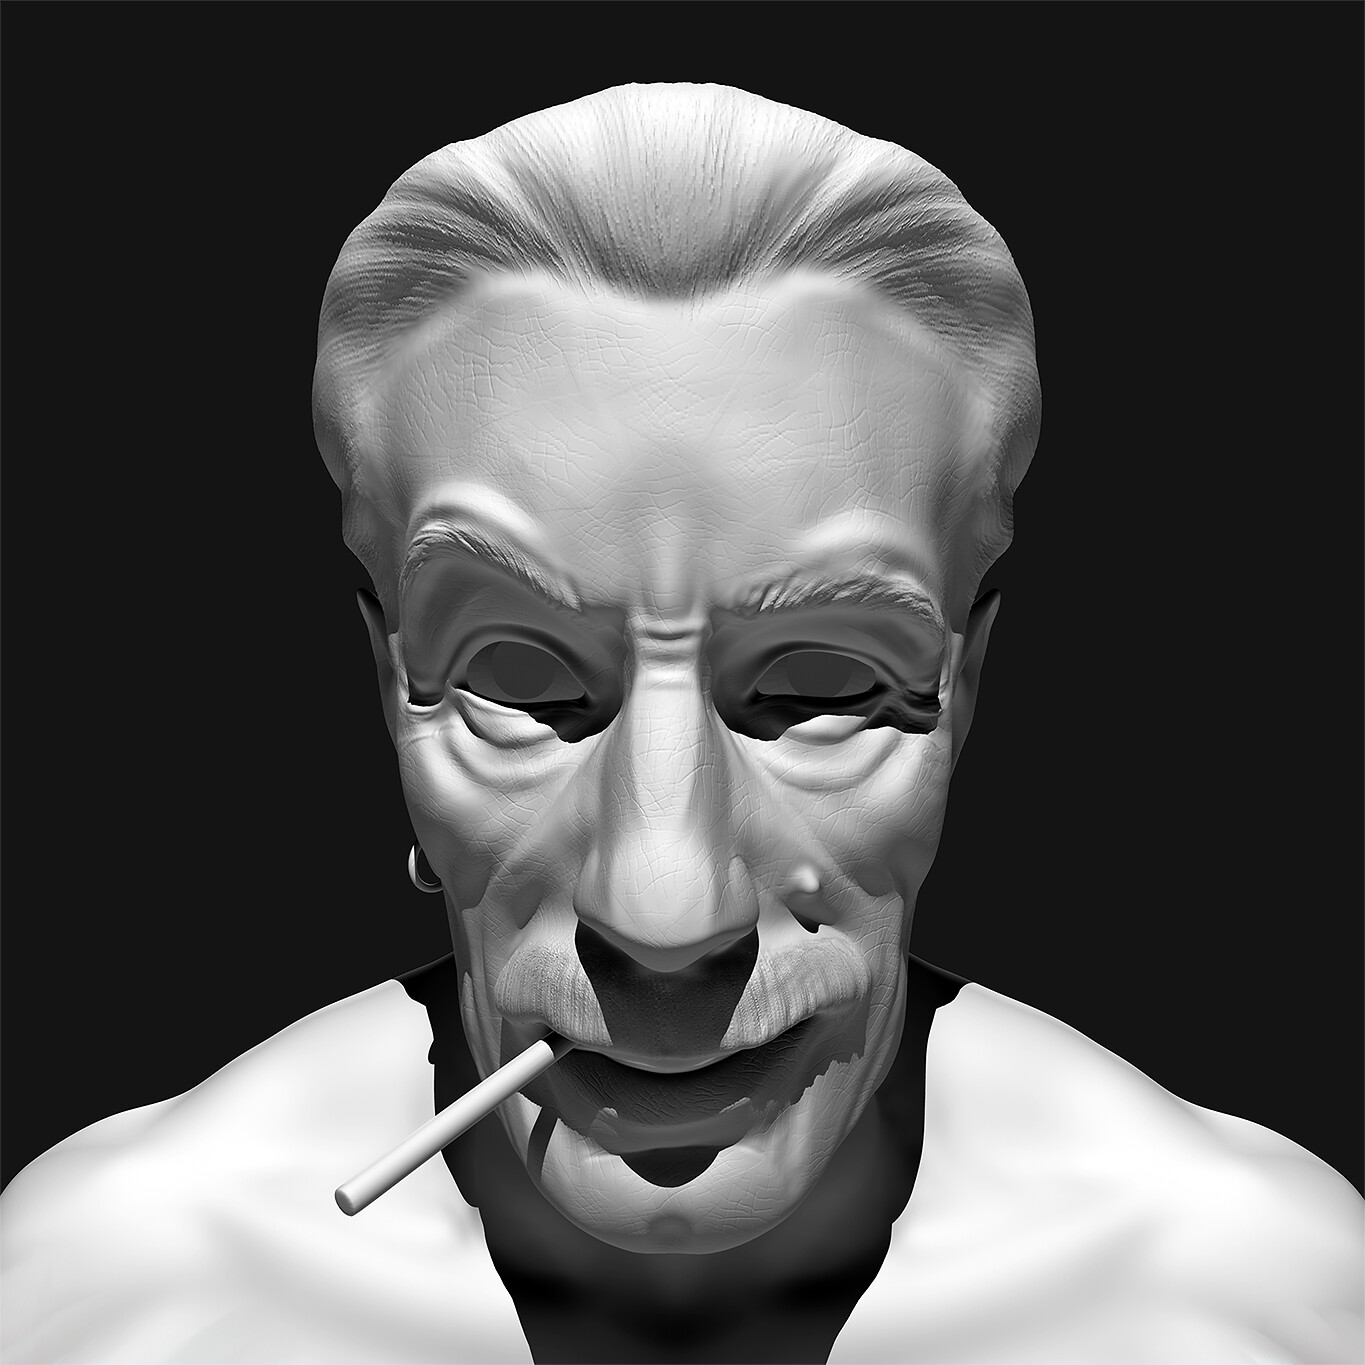 Playing with lighting after finishing the 3D sculpt